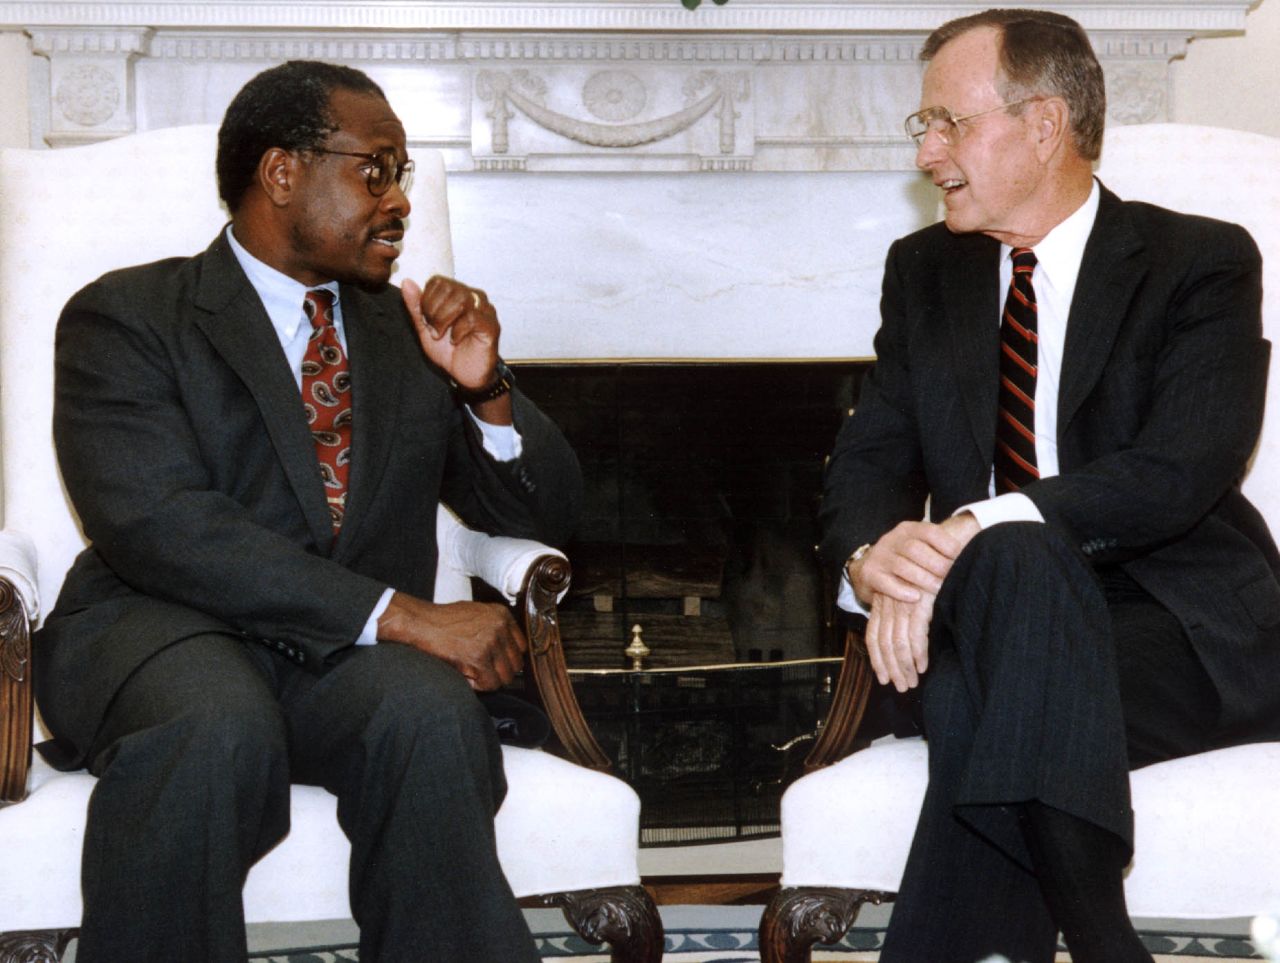 Bush meets with Thomas in October 1991 and reaffirms his "total confidence" in the Supreme Court nominee.